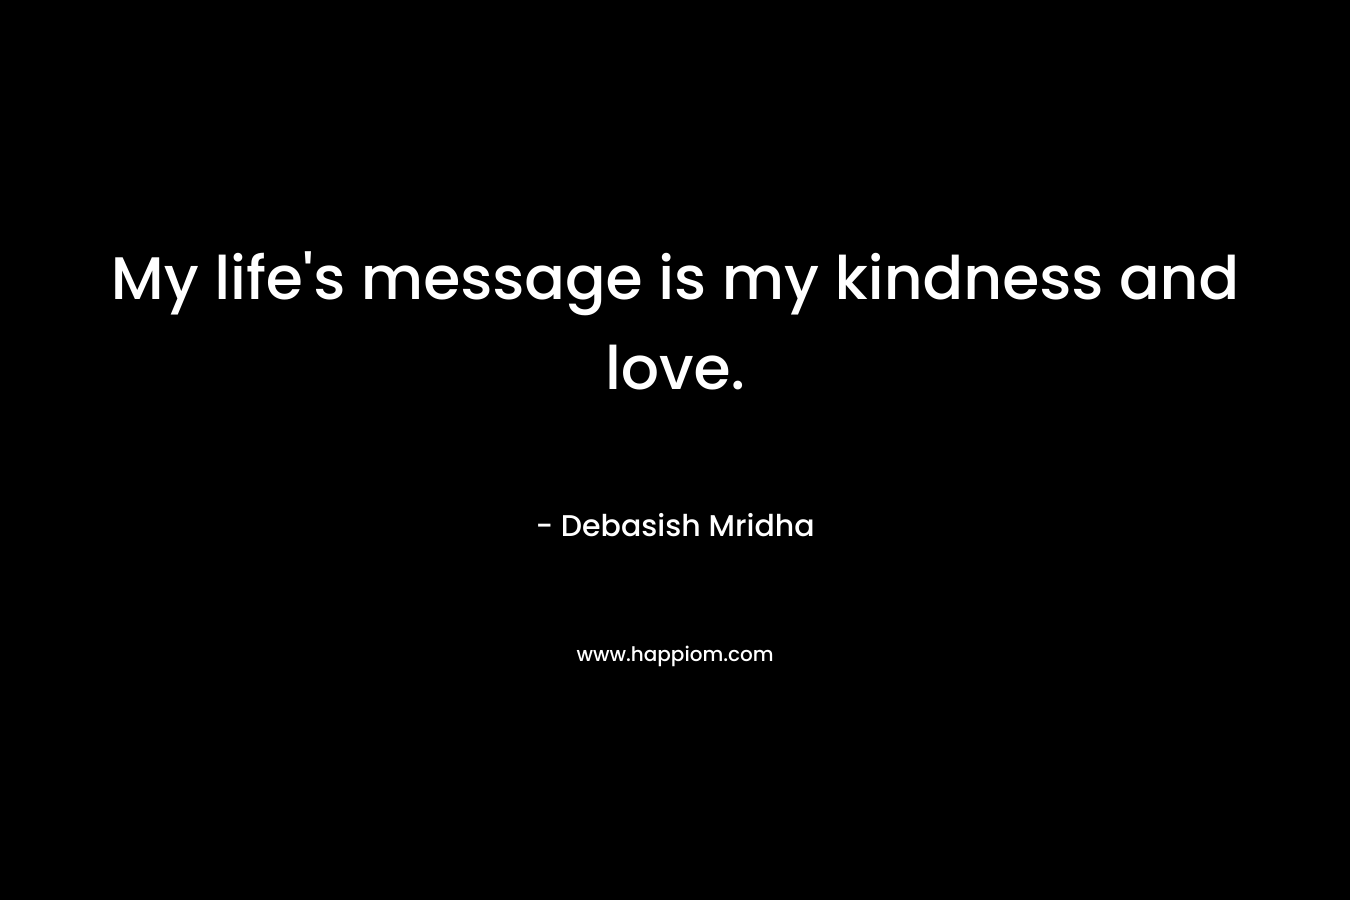 My life’s message is my kindness and love. – Debasish Mridha